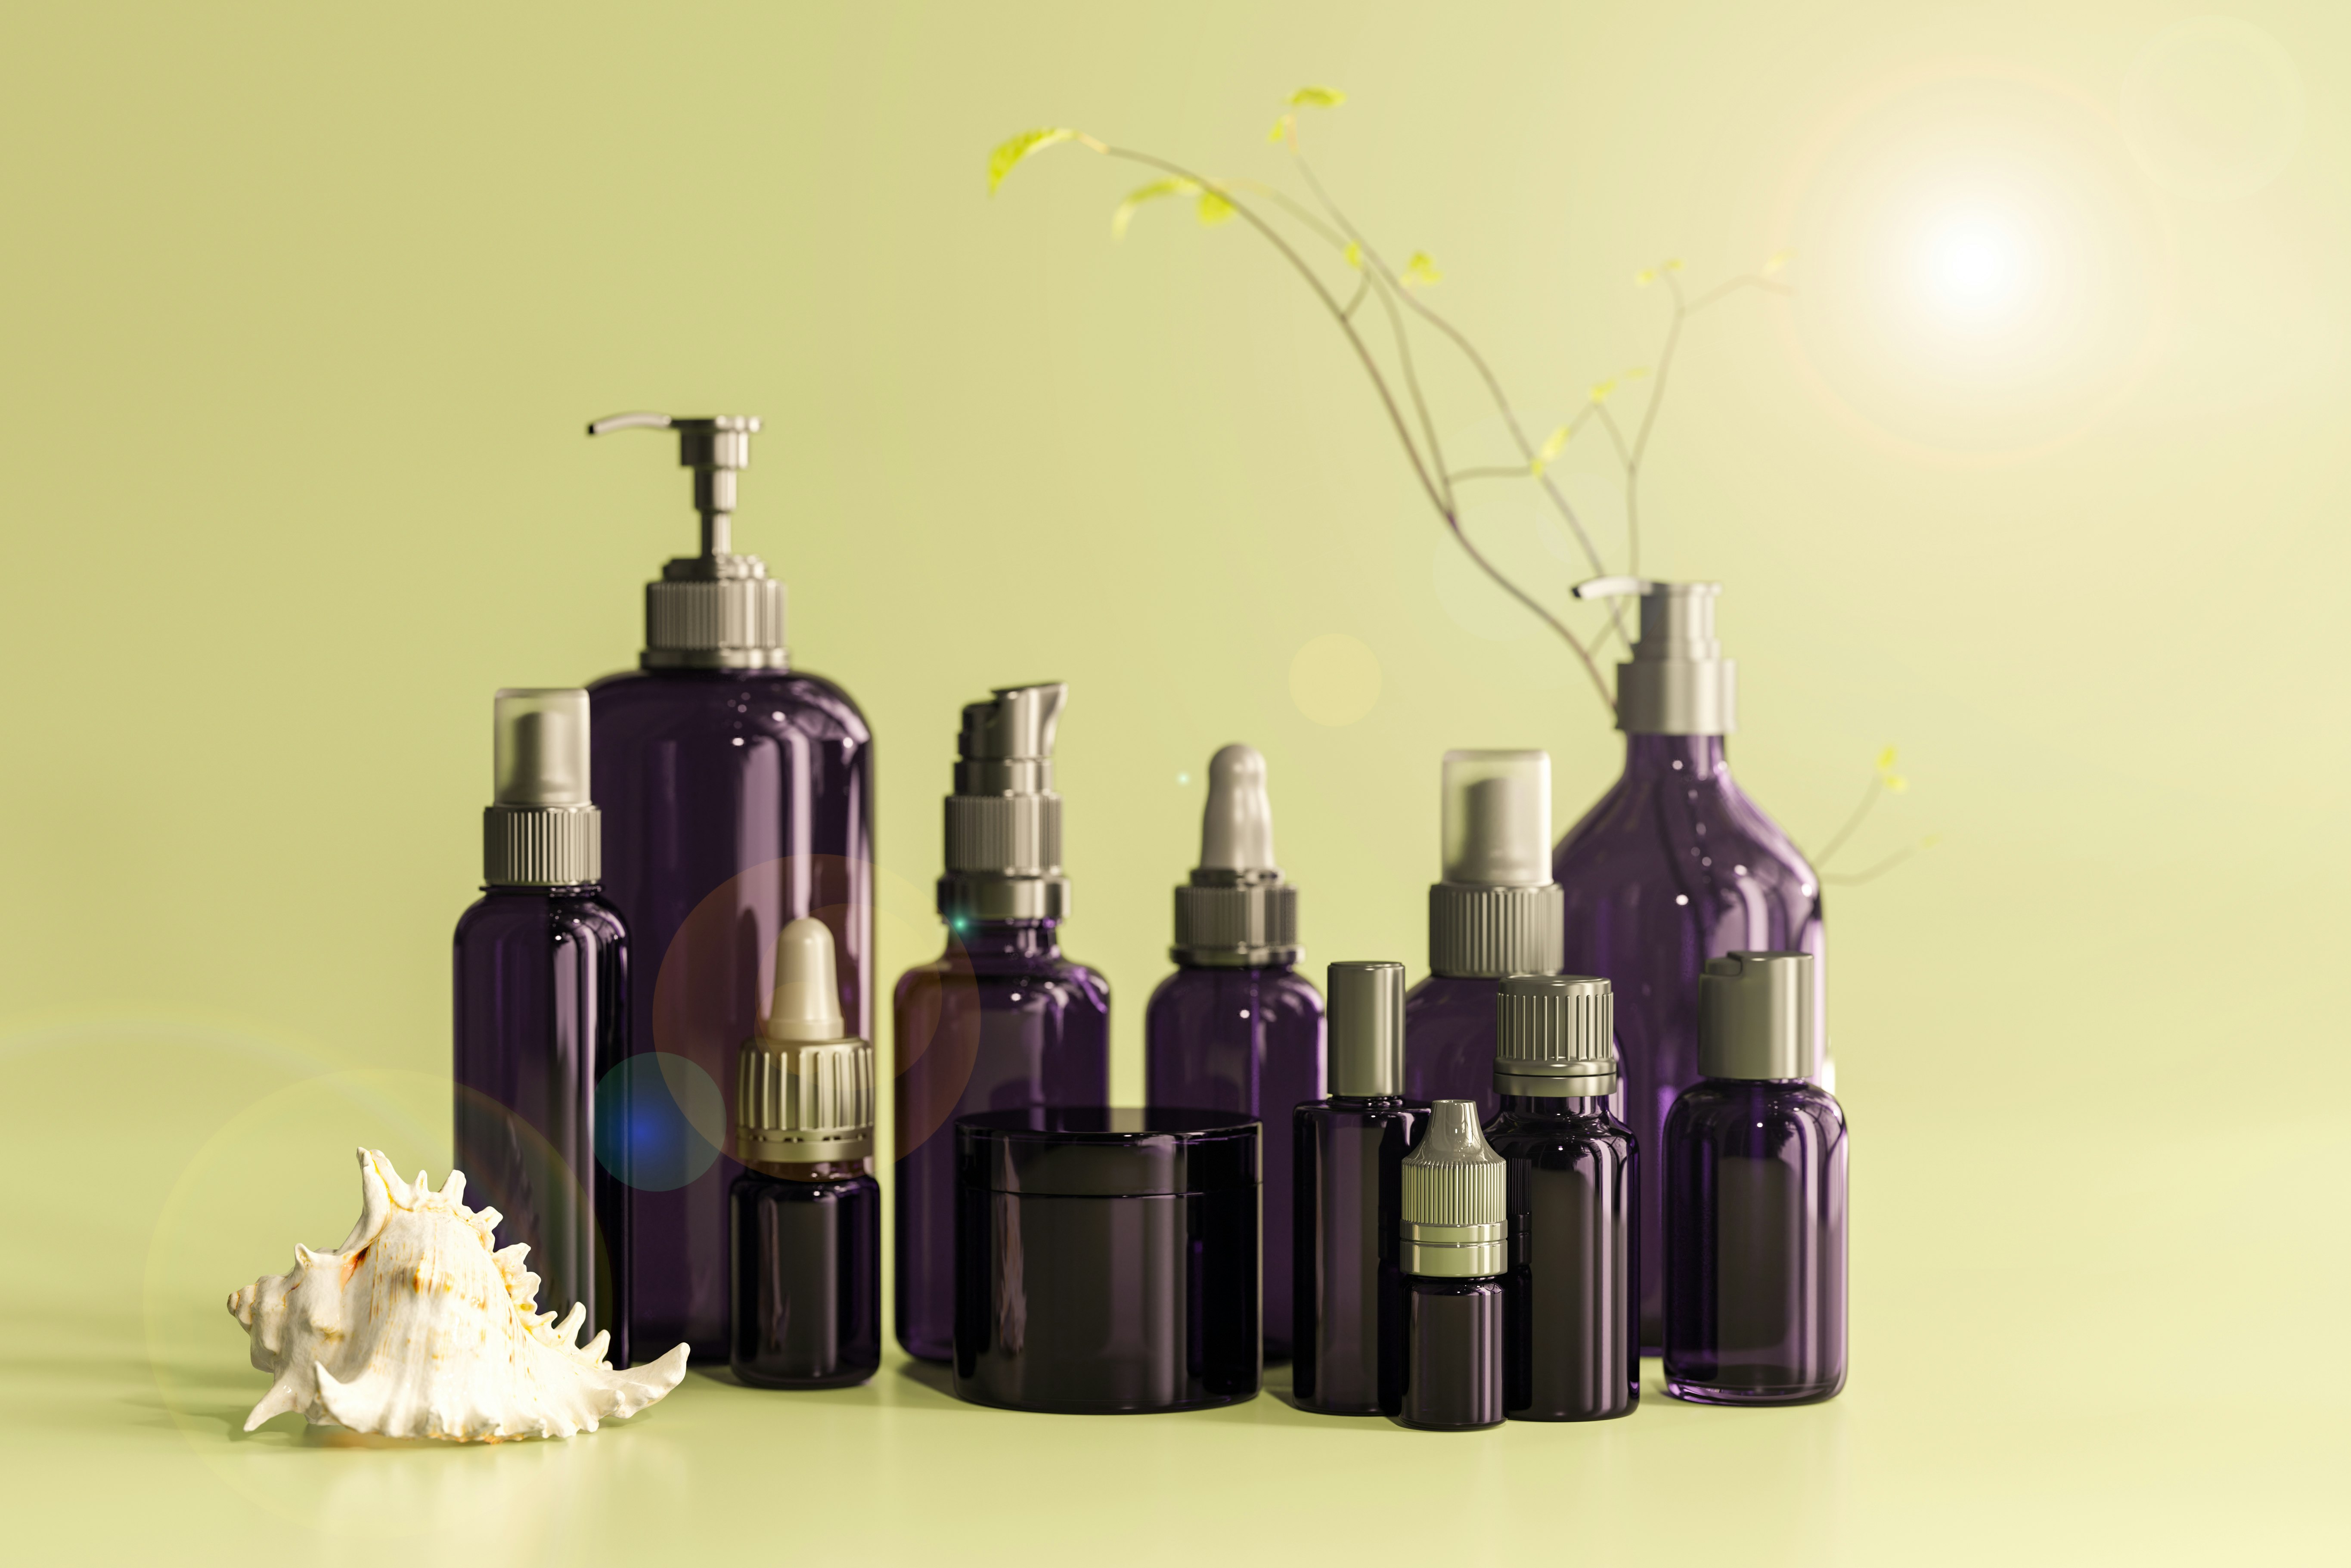 black and purple bottles on white surface